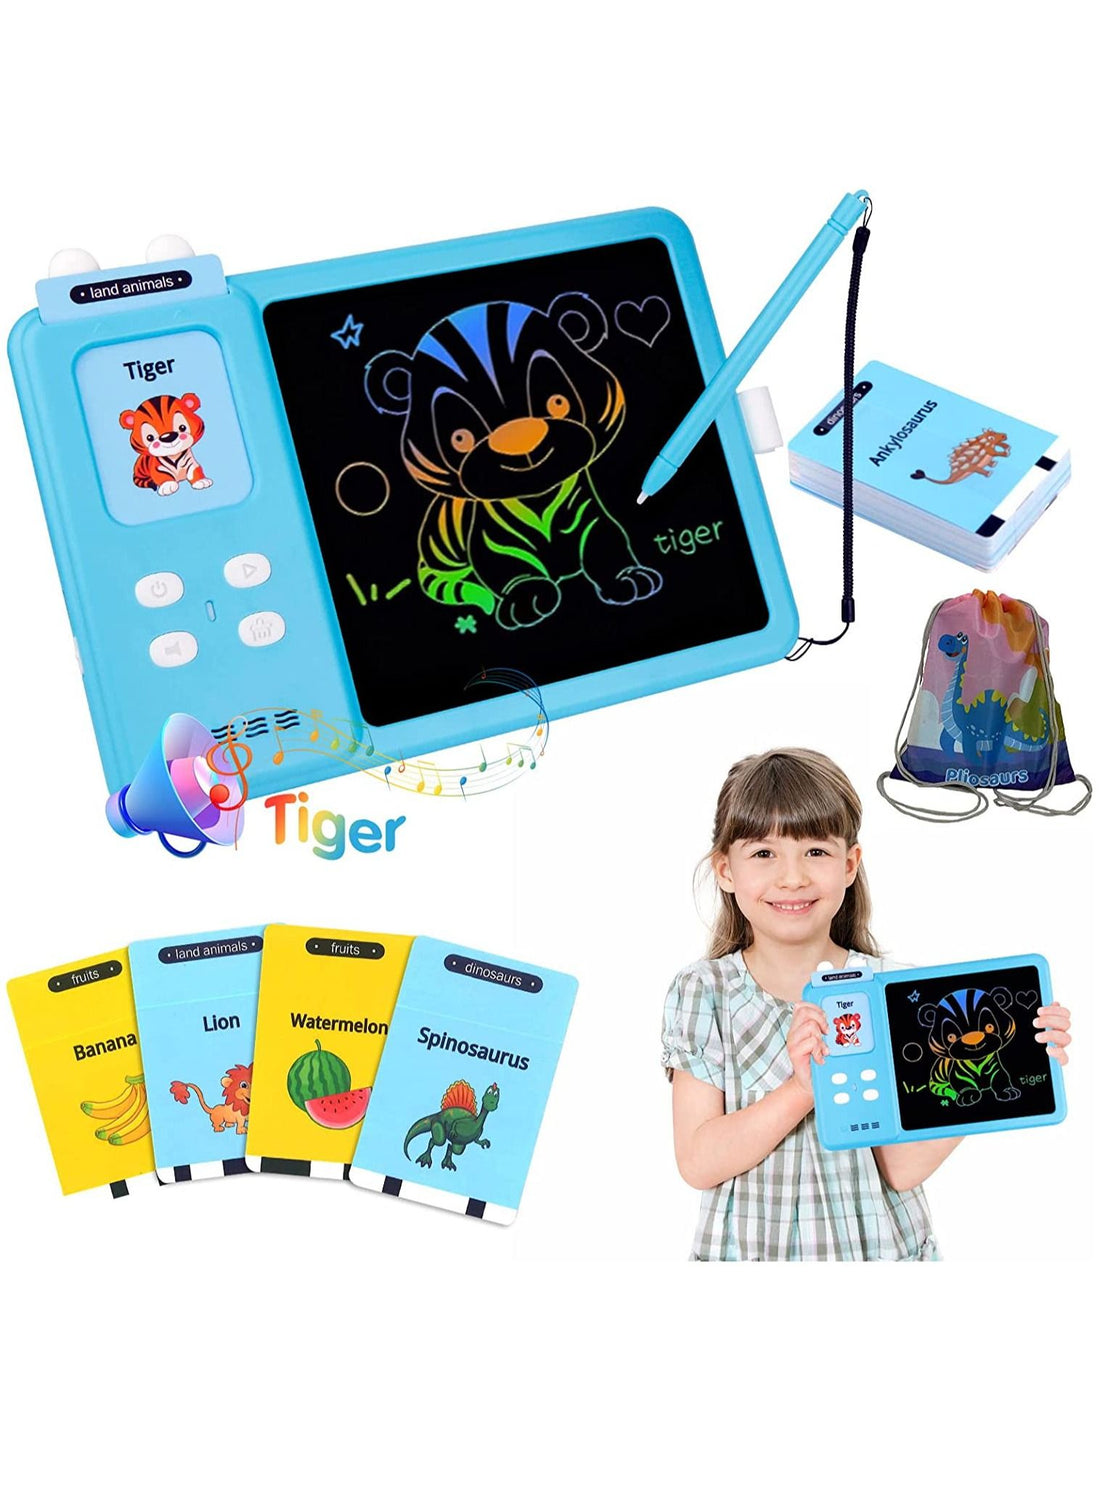 Talking Flash Cards Learning Toys